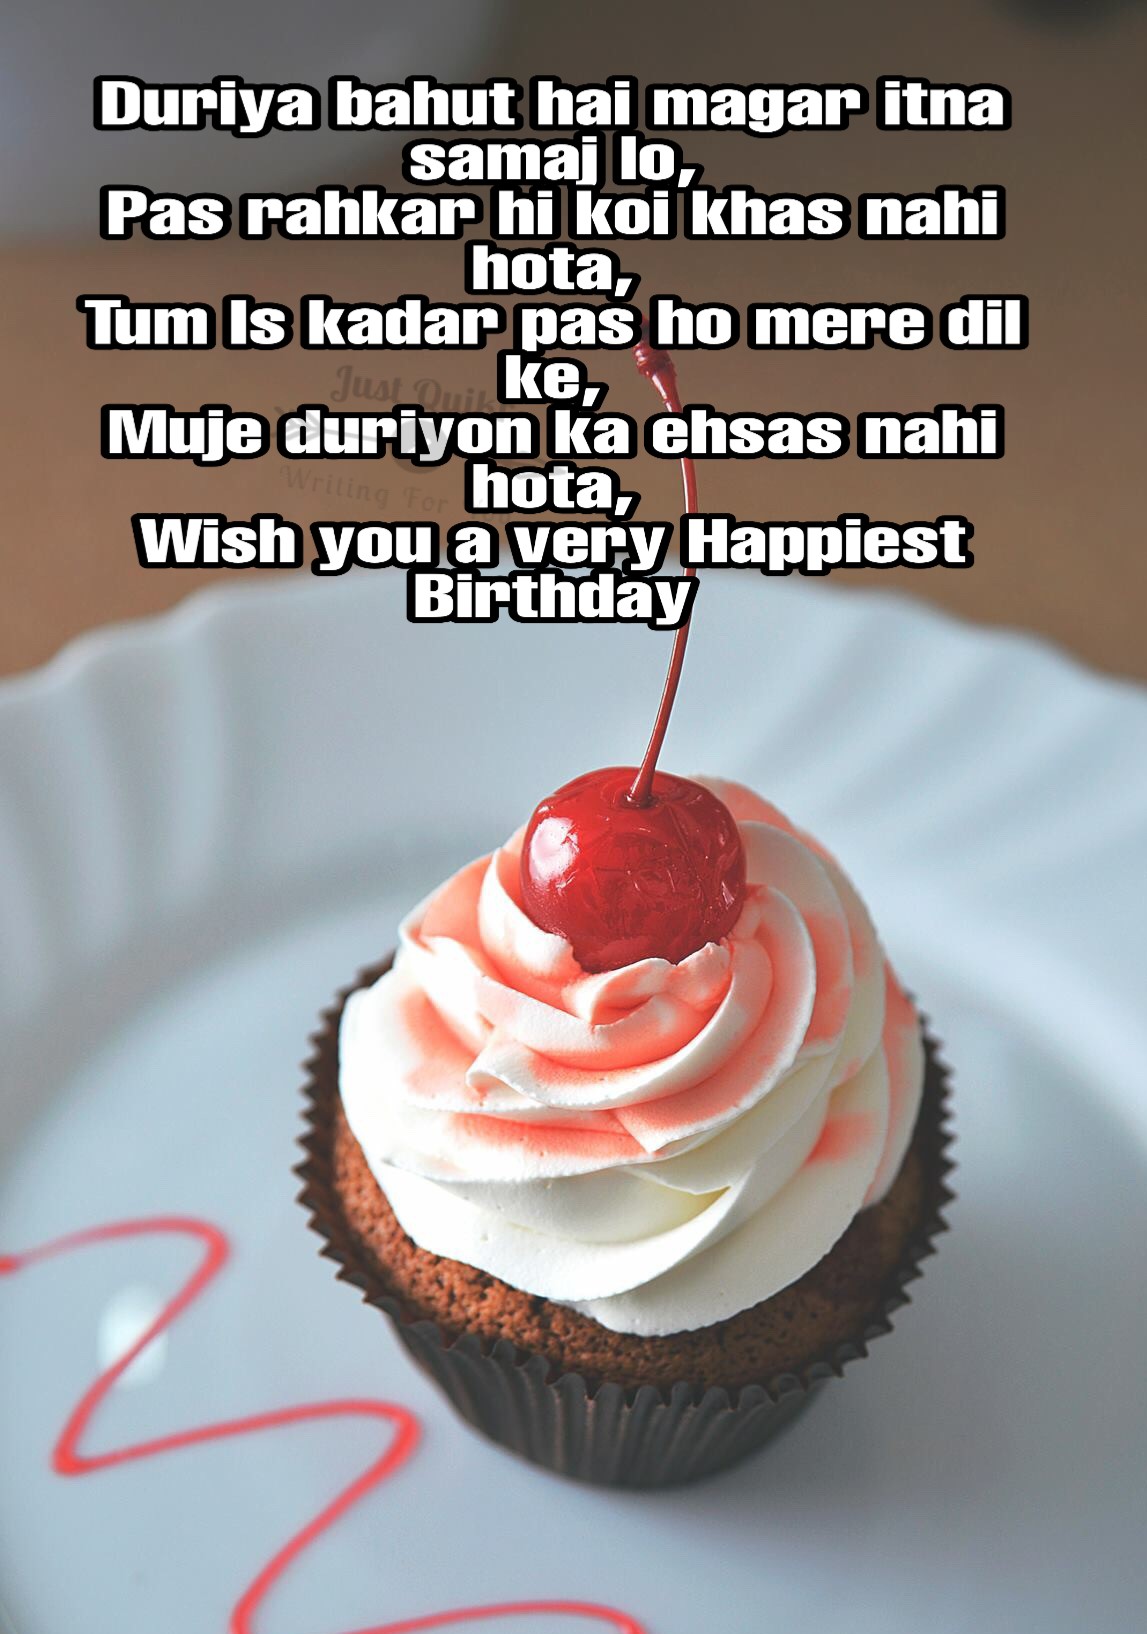 Happy Birthday Cake HD Pics Images with Shayari Sayings for Couple